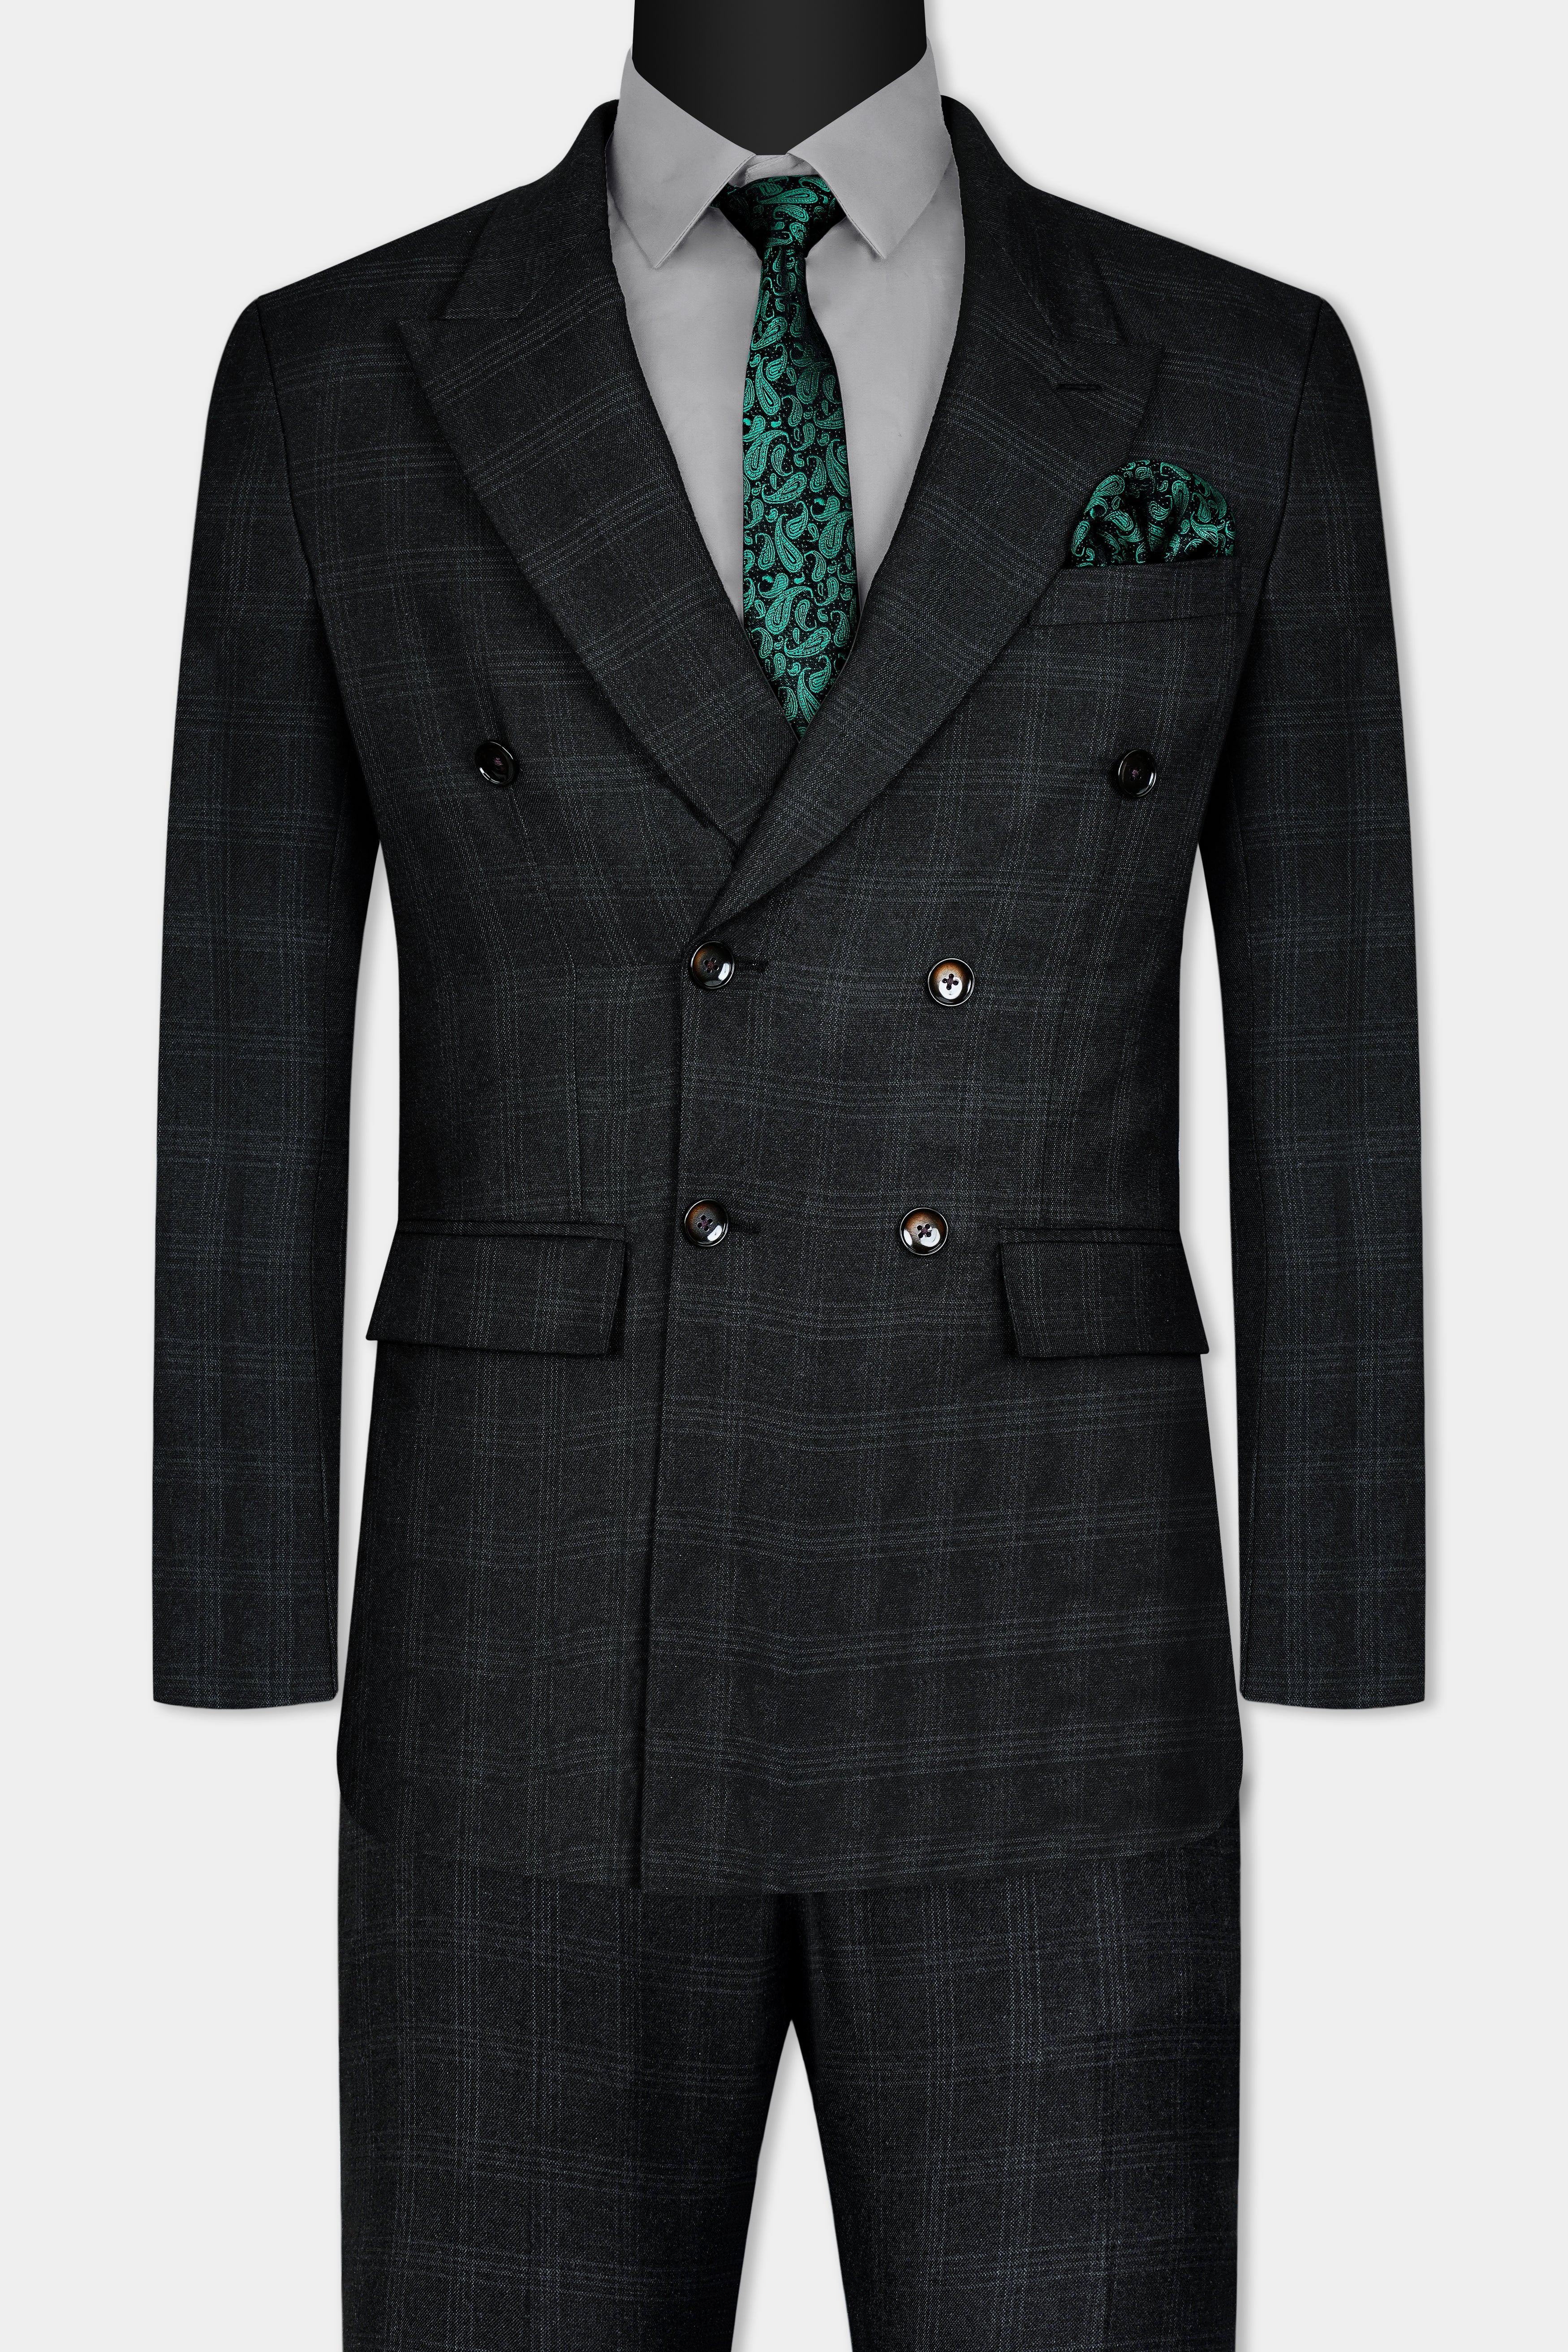 Onyx Black Subtle Checkered Wool Rich Double Breasted Suit ST2999-DB-36, ST2999-DB-38, ST2999-DB-40, ST2999-DB-42, ST2999-DB-44, ST2999-DB-46, ST2999-DB-48, ST2999-DB-50, ST2999-DB-52, ST2999-DB-54, ST2999-DB-56, ST2999-DB-58, ST2999-DB-60